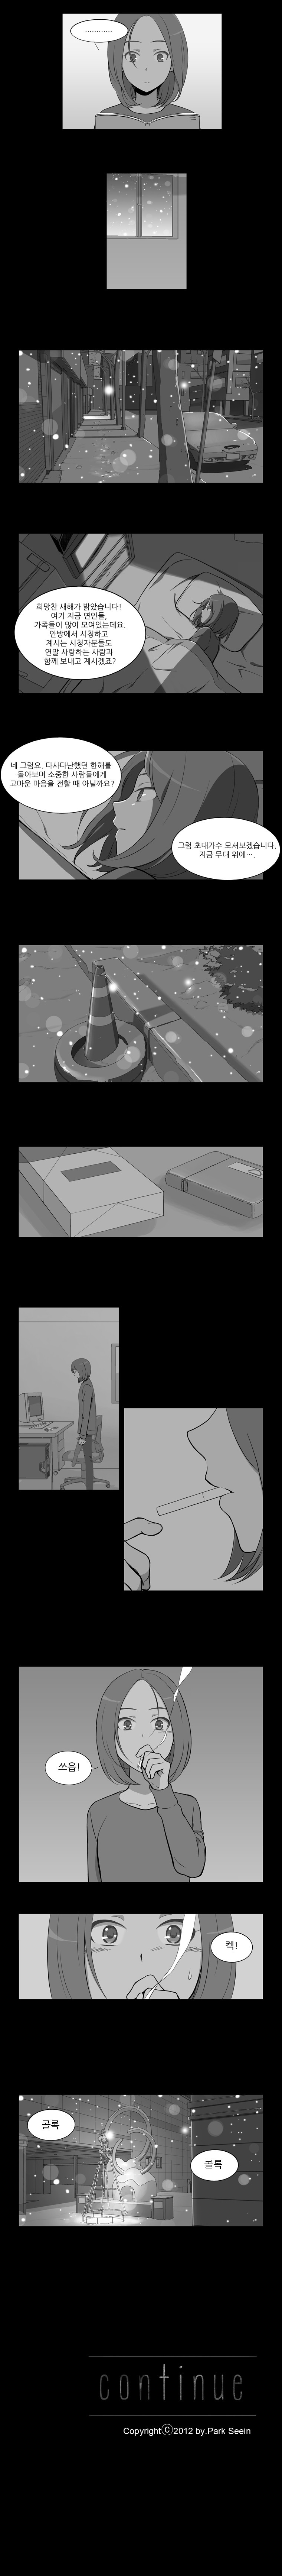 Gaussian Blur - Chapter 16 - Page 4